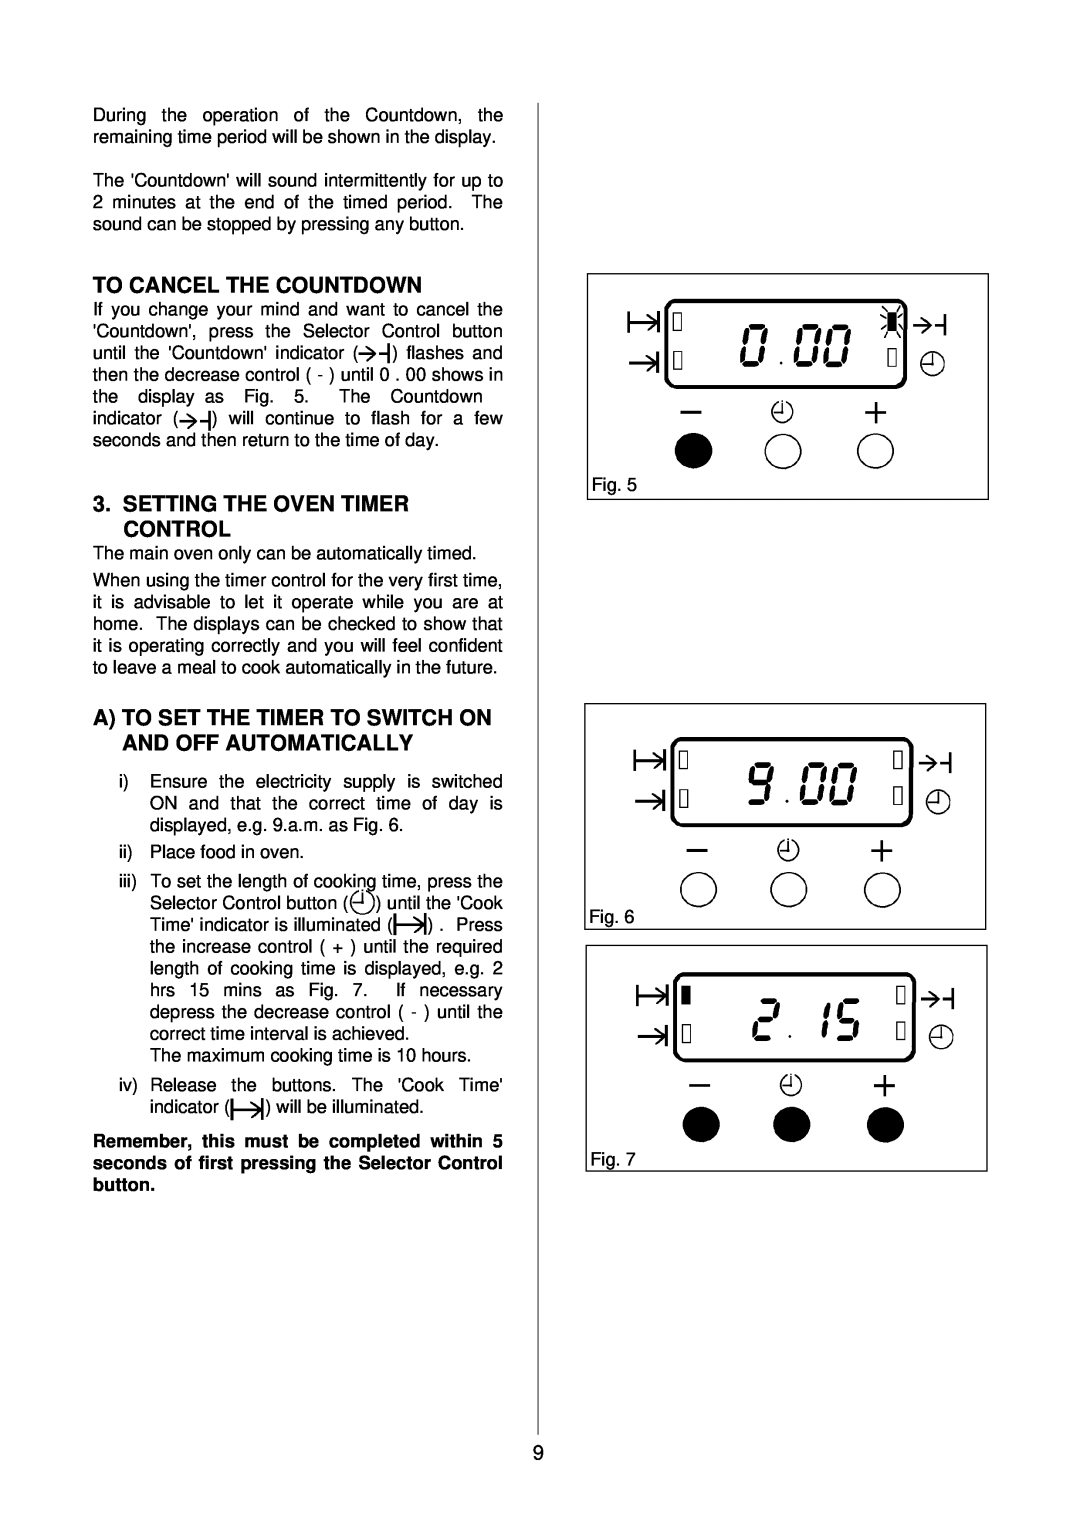 Electrolux D4100-1 operating instructions To Cancel The Countdown, Setting The Oven Timer Control 